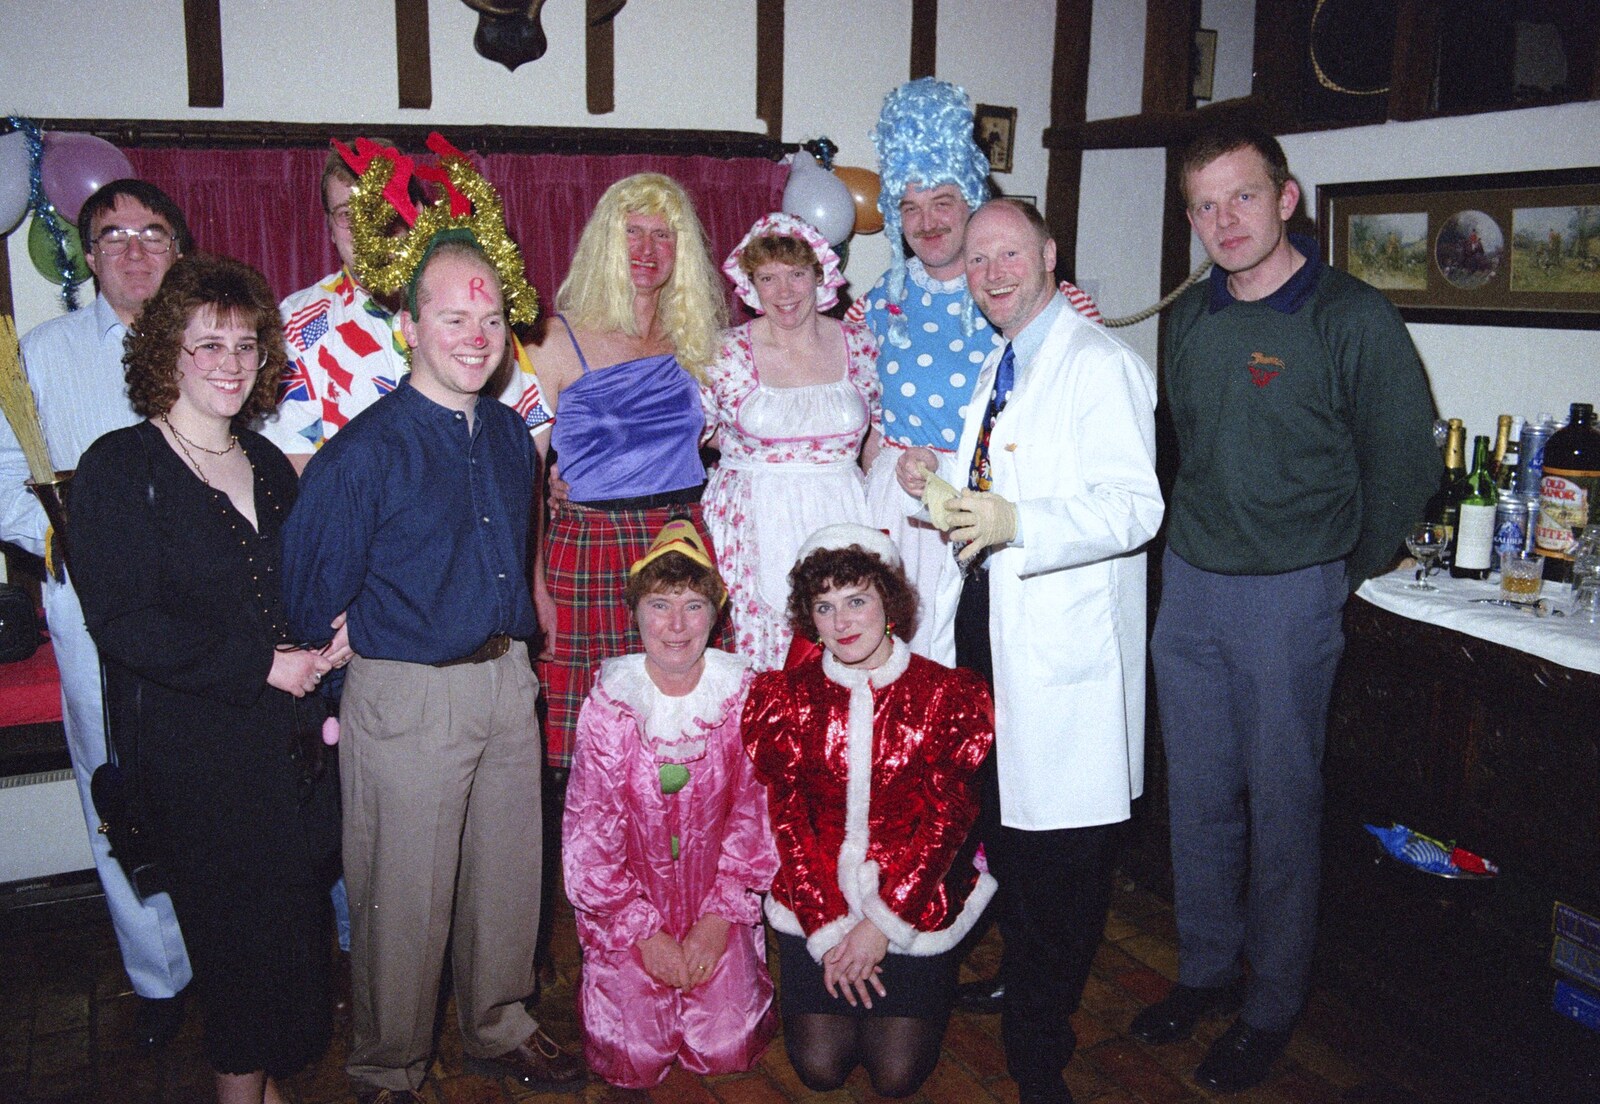 A party group photo from Geoff's Birthday, Stuston, Suffolk - 18th December 1995